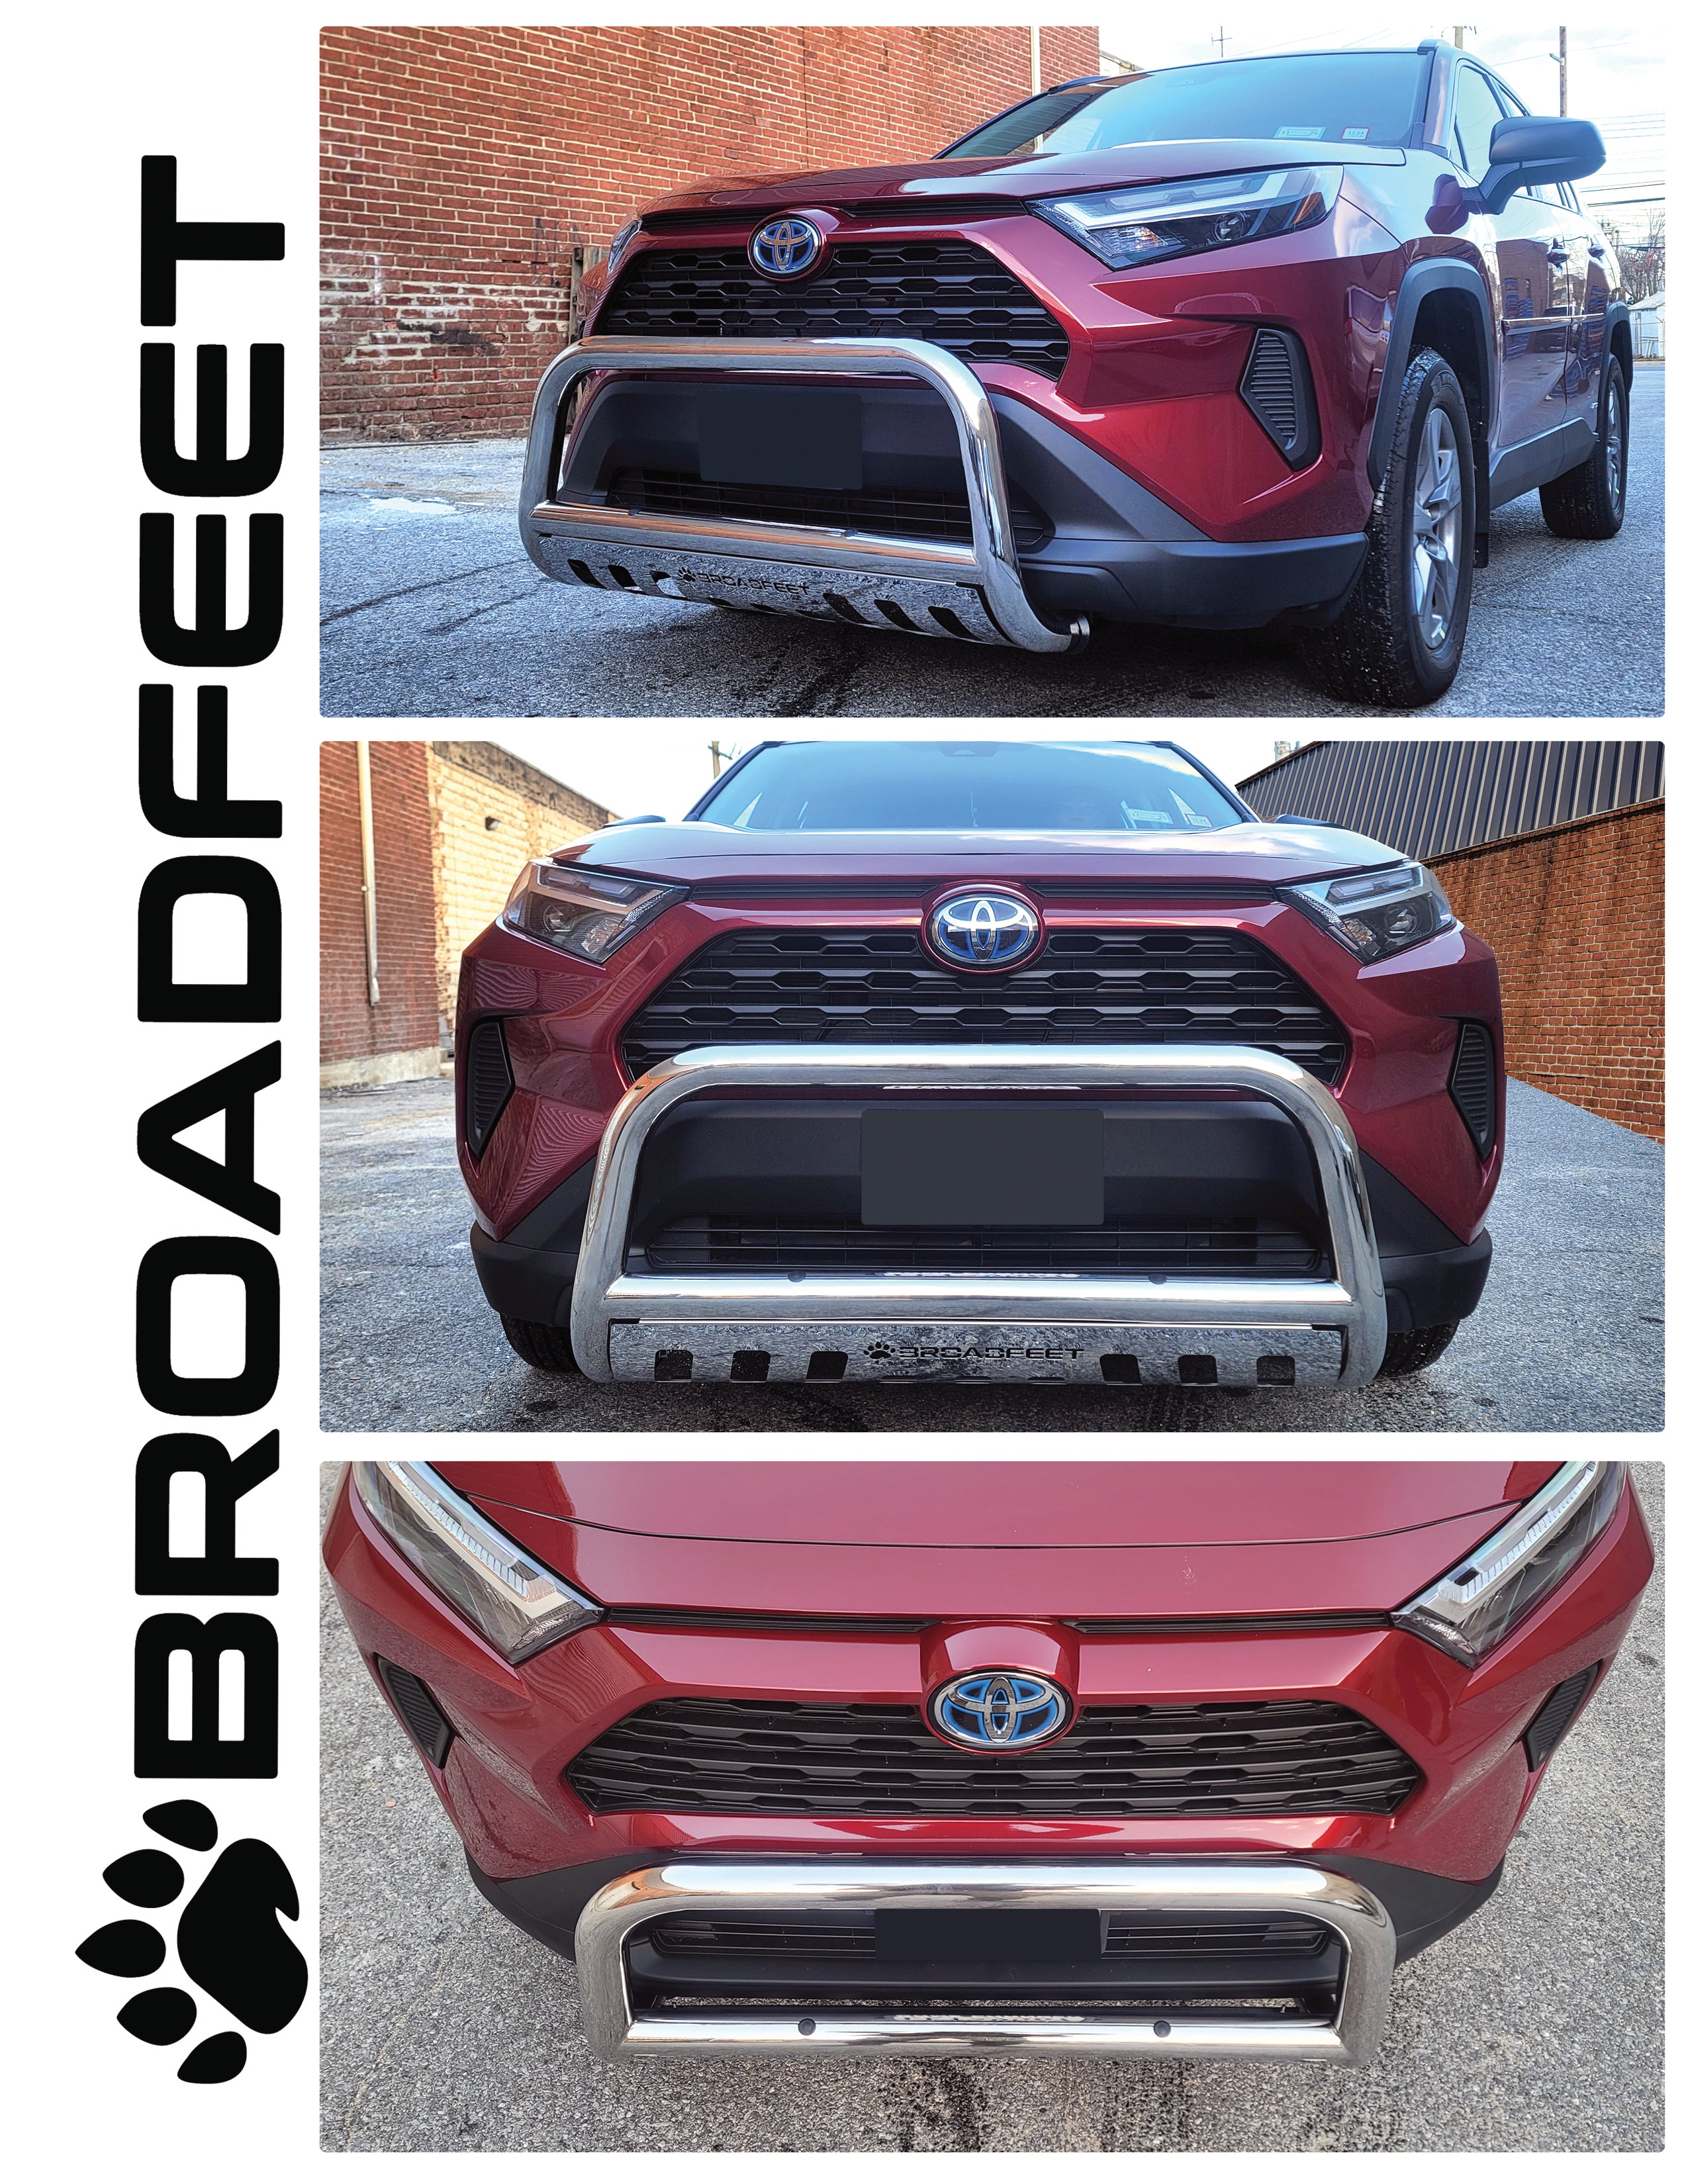 Front Bull Bar with Skid Plate (DW8) Straight Style Bumper Guard fits Toyota RAV4 2019-2024 - Broadfeet